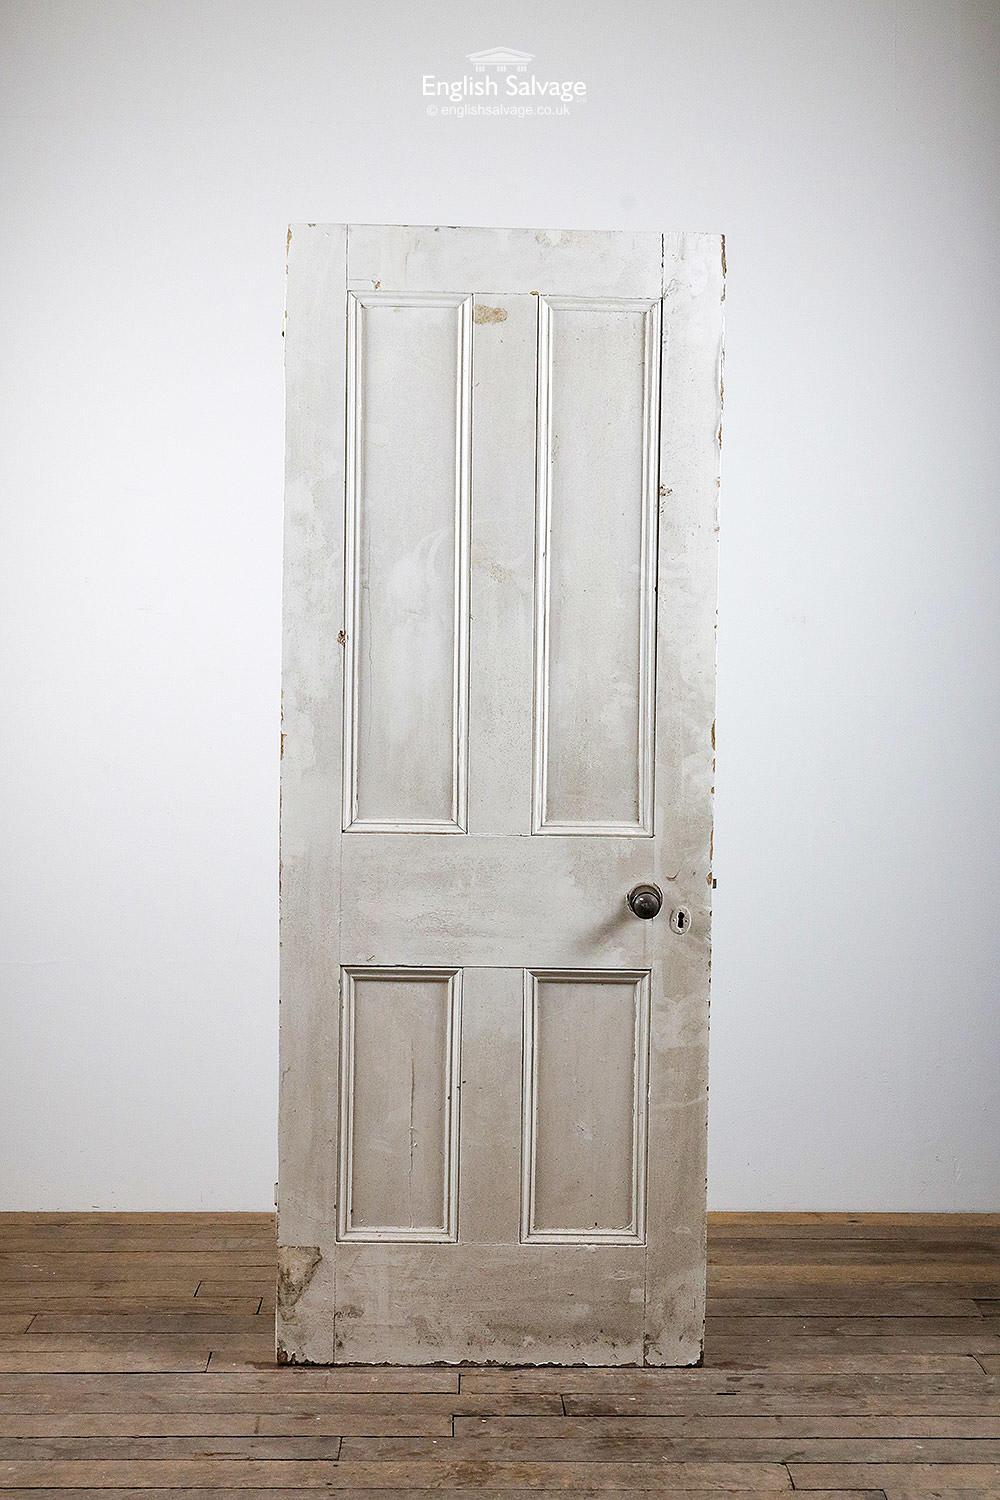 Salvaged four panel Victorian door with beading both sides. Working rim lock (no key) and Bakelite handle. Two hinges, splits to panels. Chips to the paintwork.